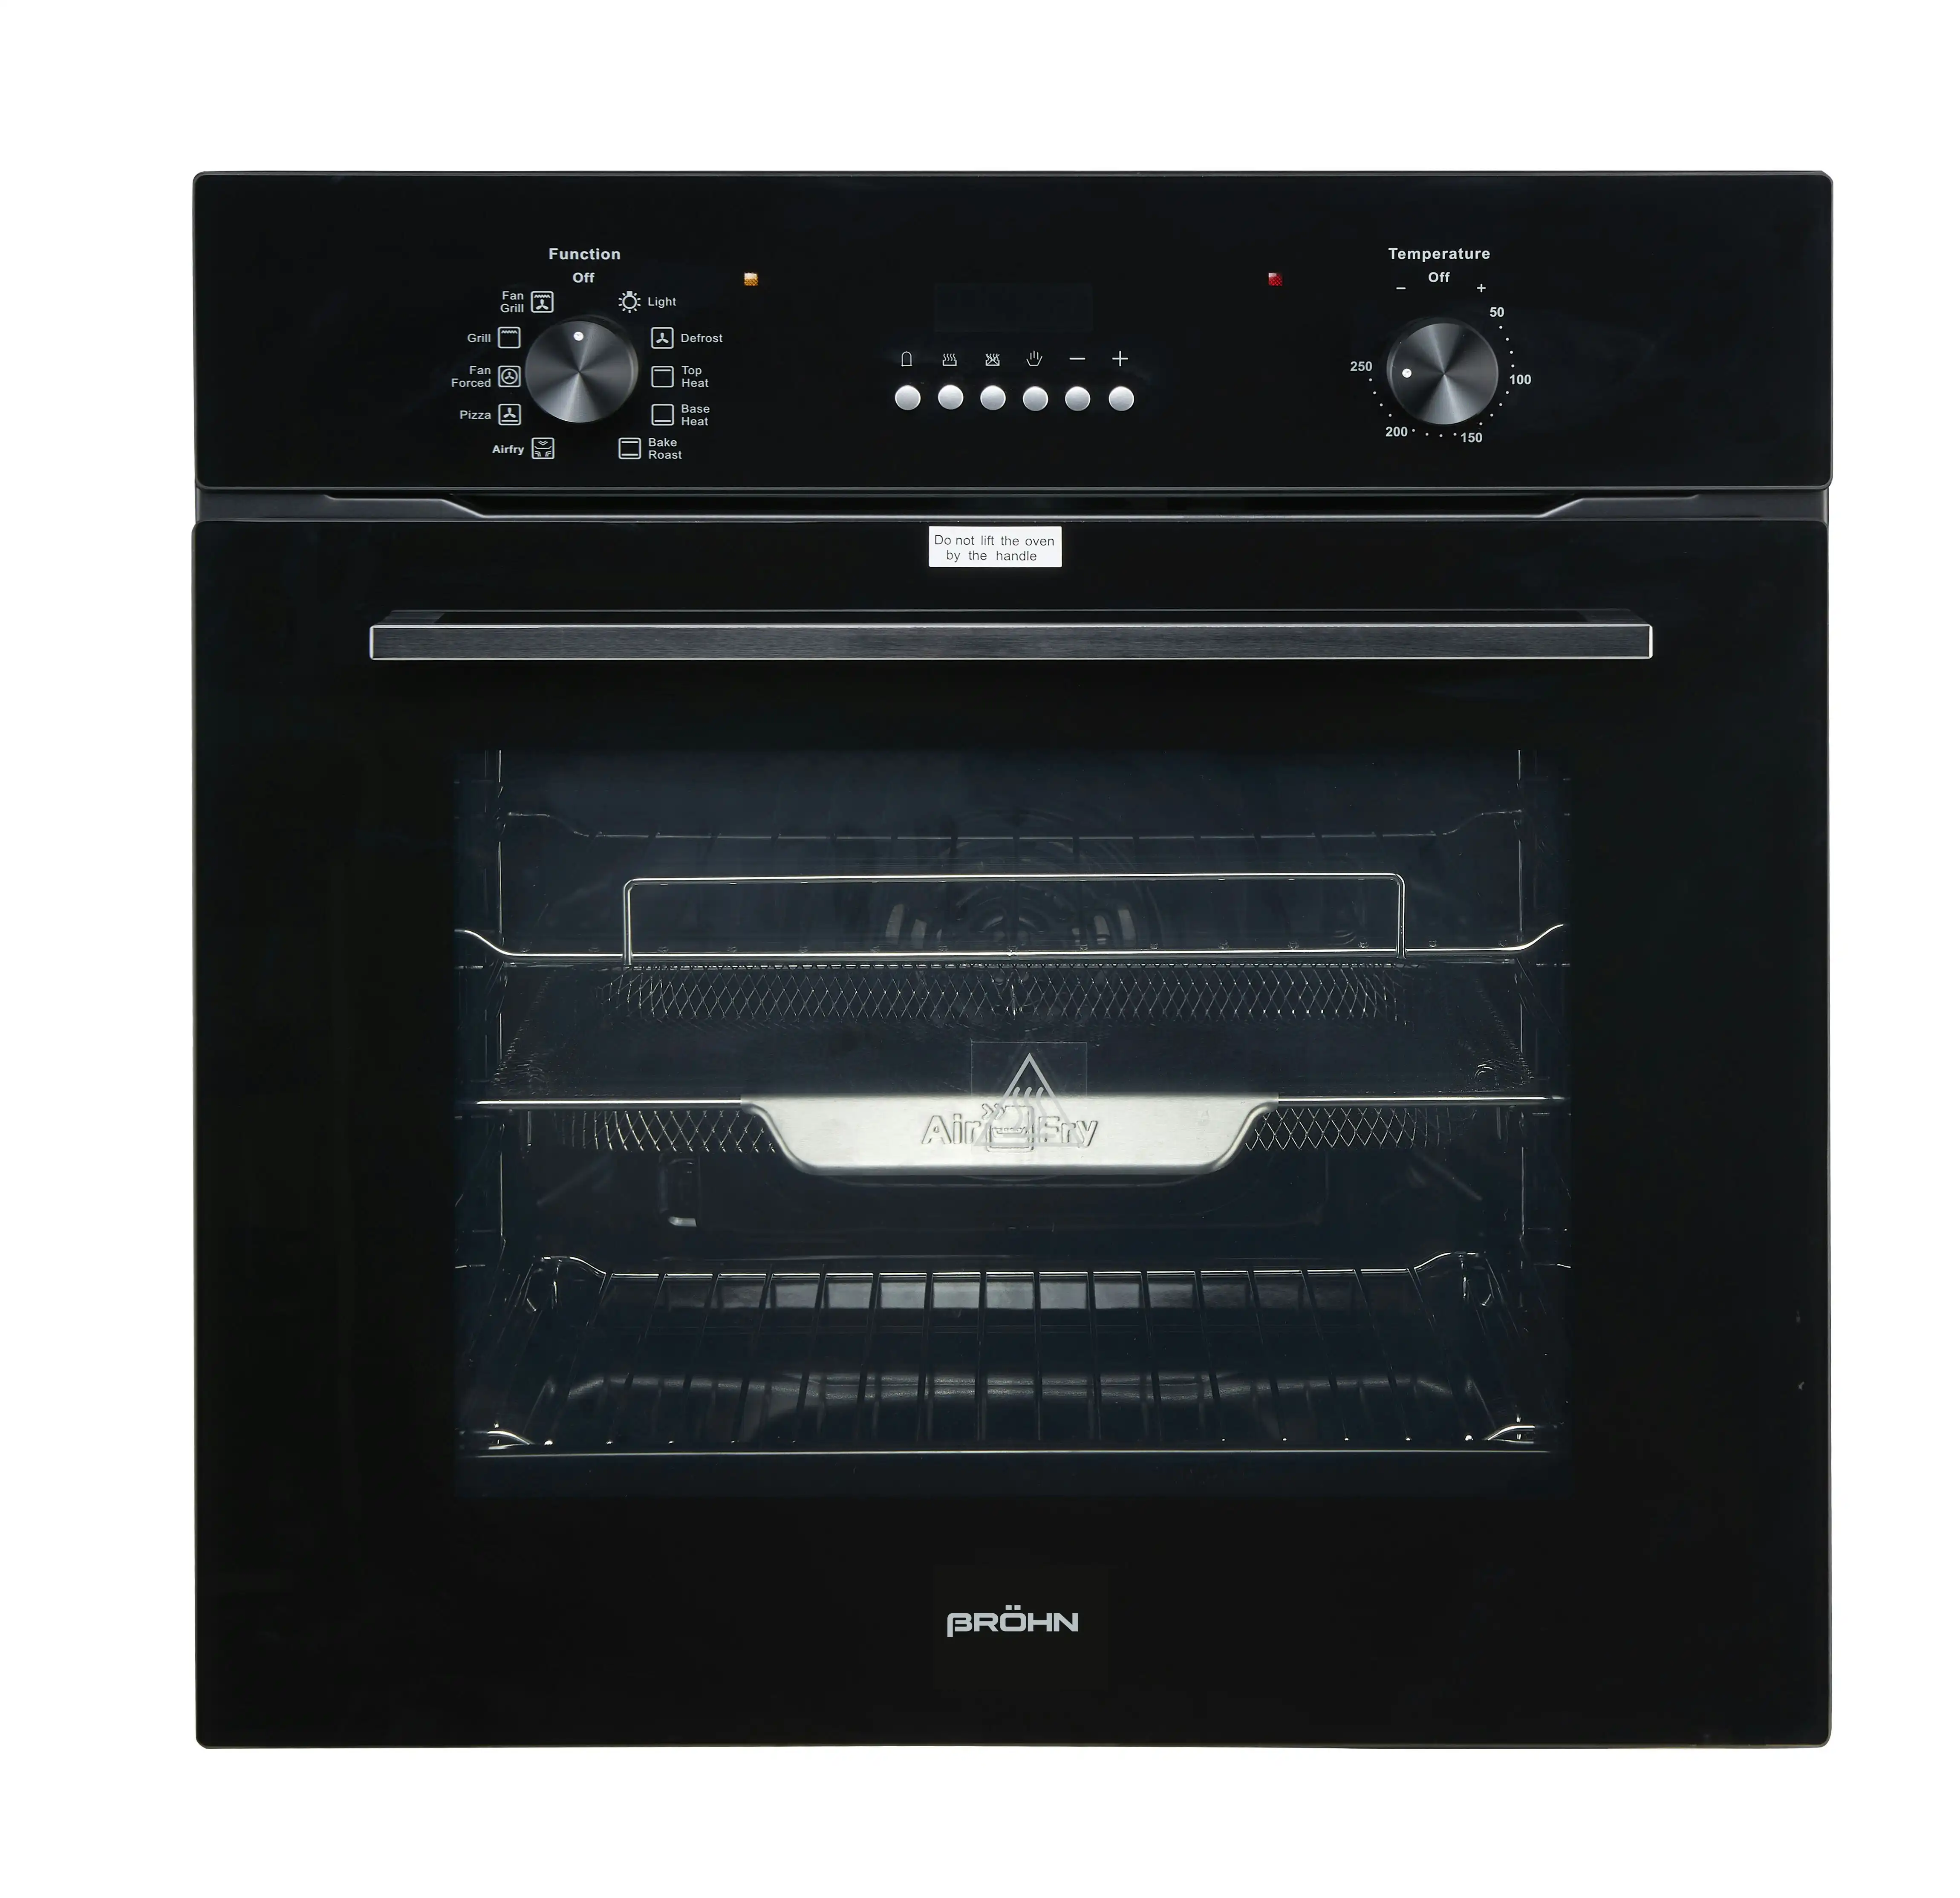 Brohn 60cm Built-in Electric Oven Black Glass 10 Functions with Inbuilt AirFry mode